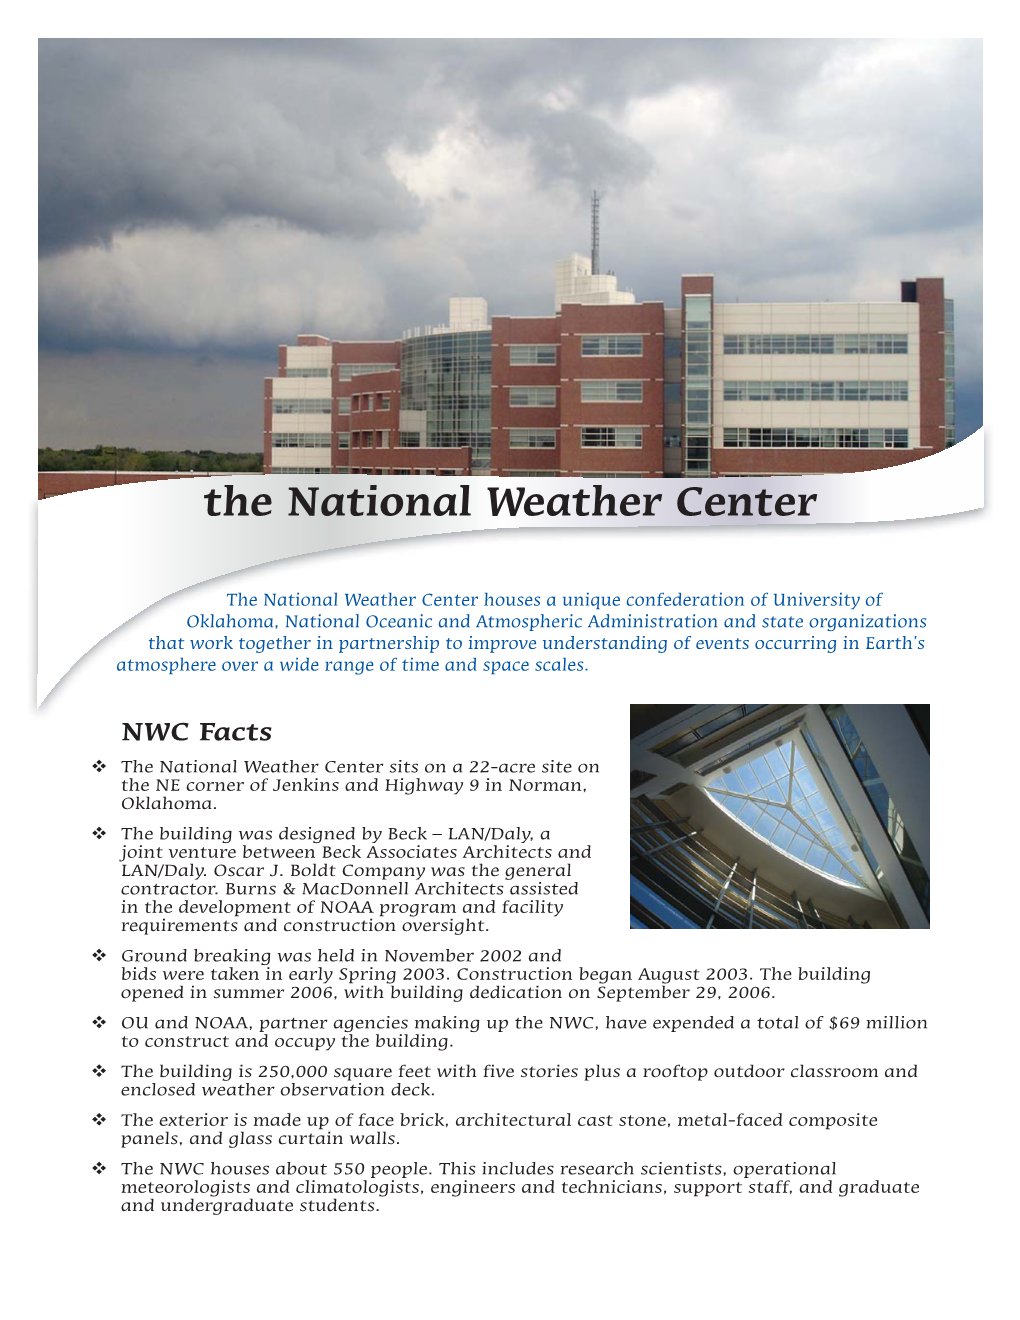 NWC Facts ™ the National Weather Center Sits on a 22-Acre Site on the NE Corner of Jenkins and Highway 9 in Norman, Oklahoma